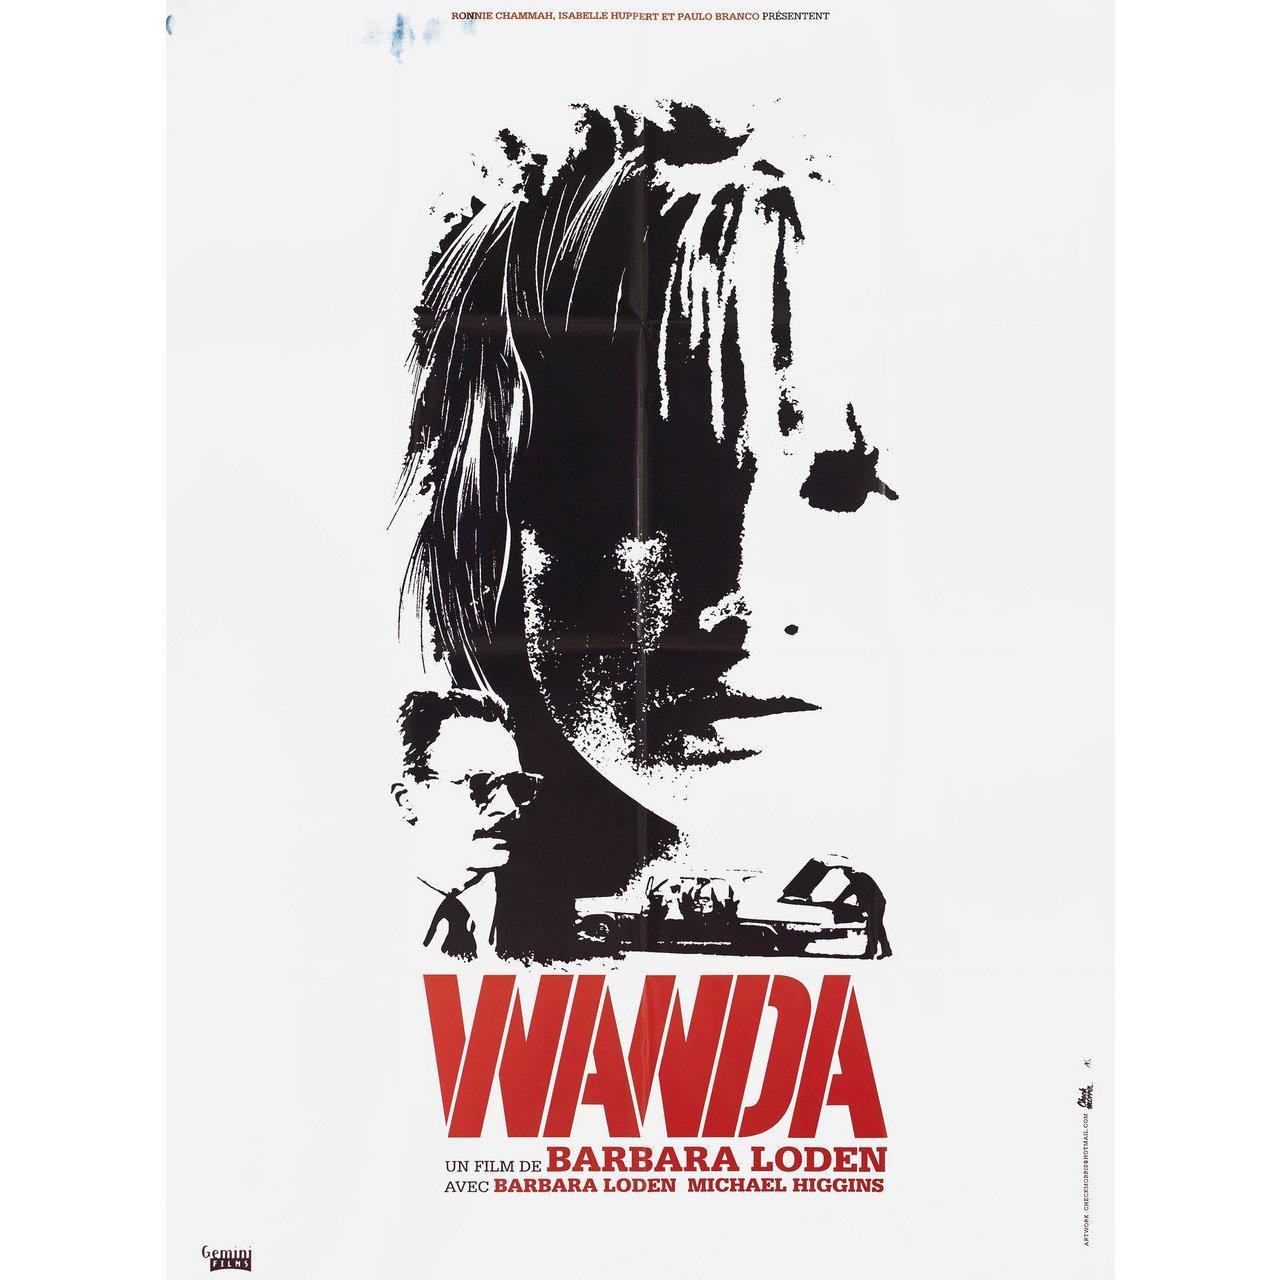 Original 2003 re-release French grande poster by Check Morris for the 1970 film Wanda directed by Barbara Loden with Barbara Loden / Michael Higgins / Dorothy Shupenes / Peter Shupenes. Fine condition, folded. Many original posters were issued